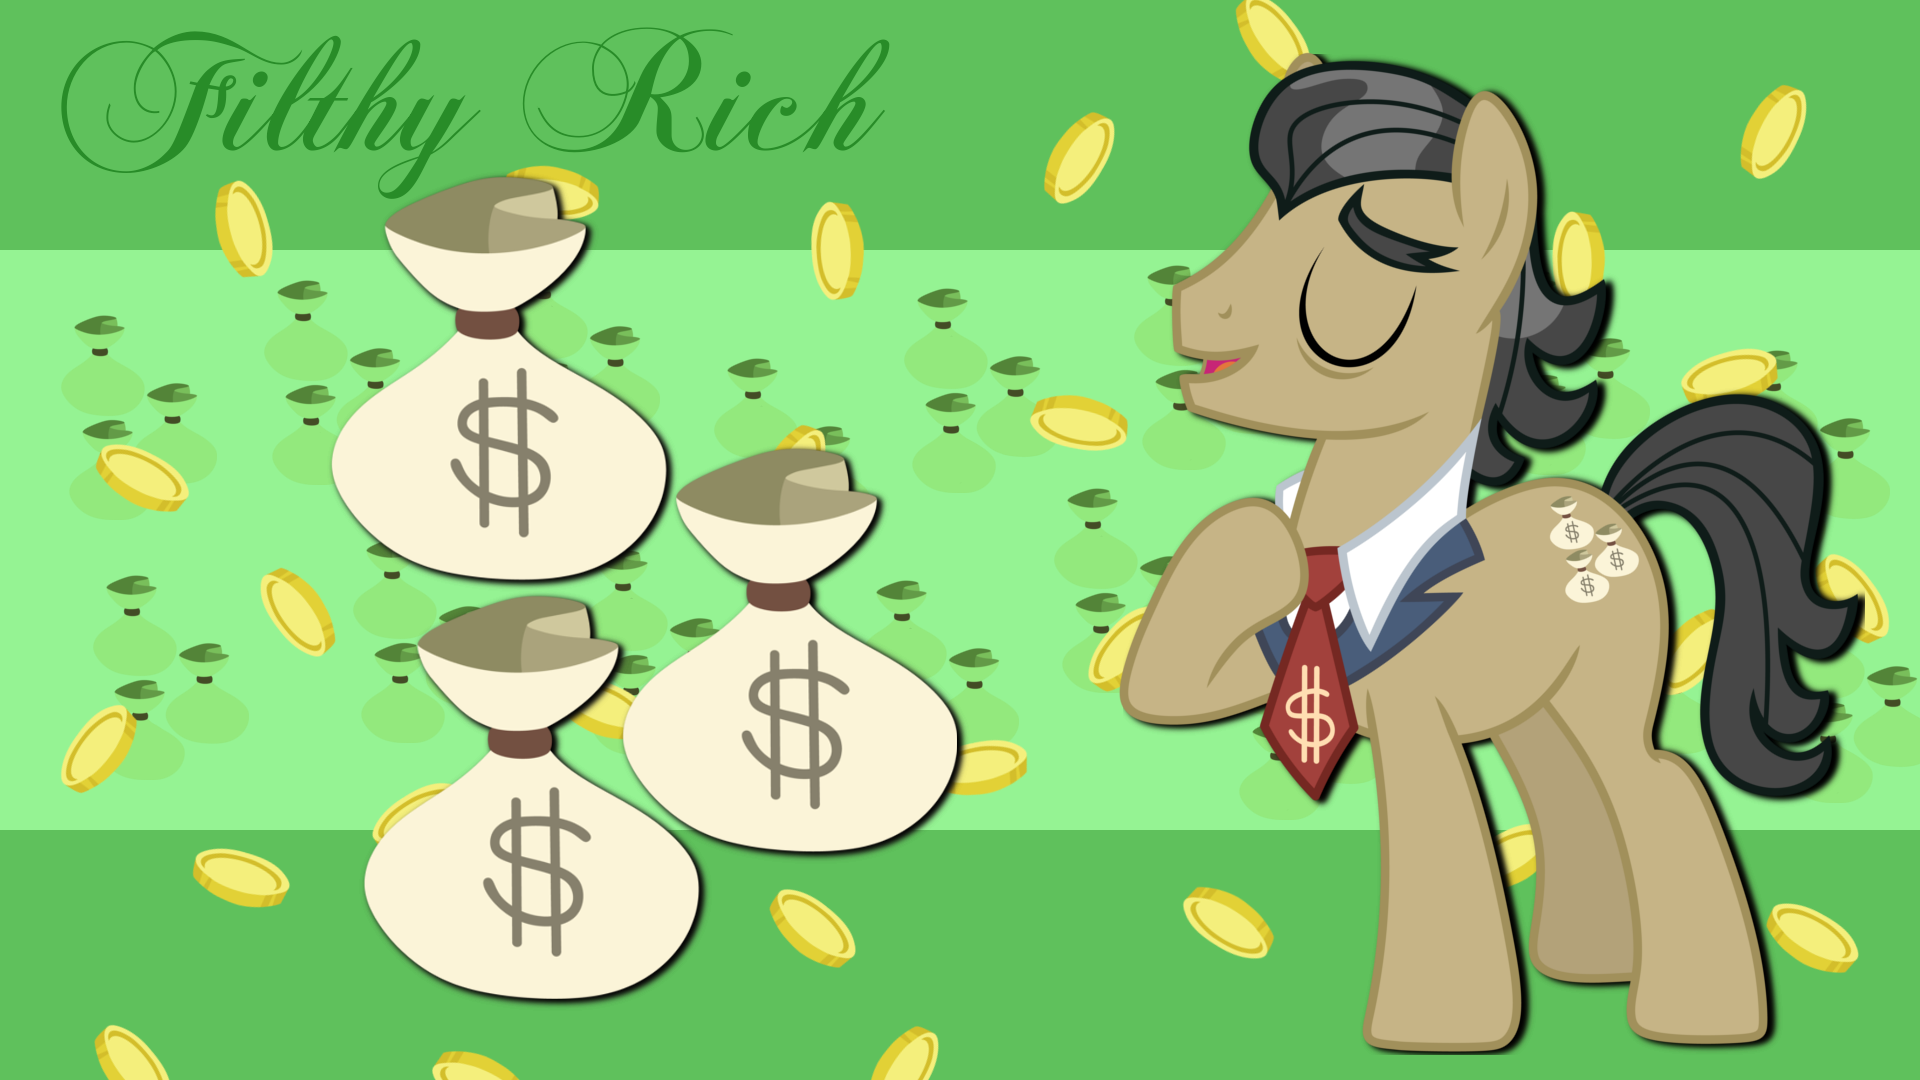 Filthy Rich Wallpaper by AxemGR and TheSharp0ne